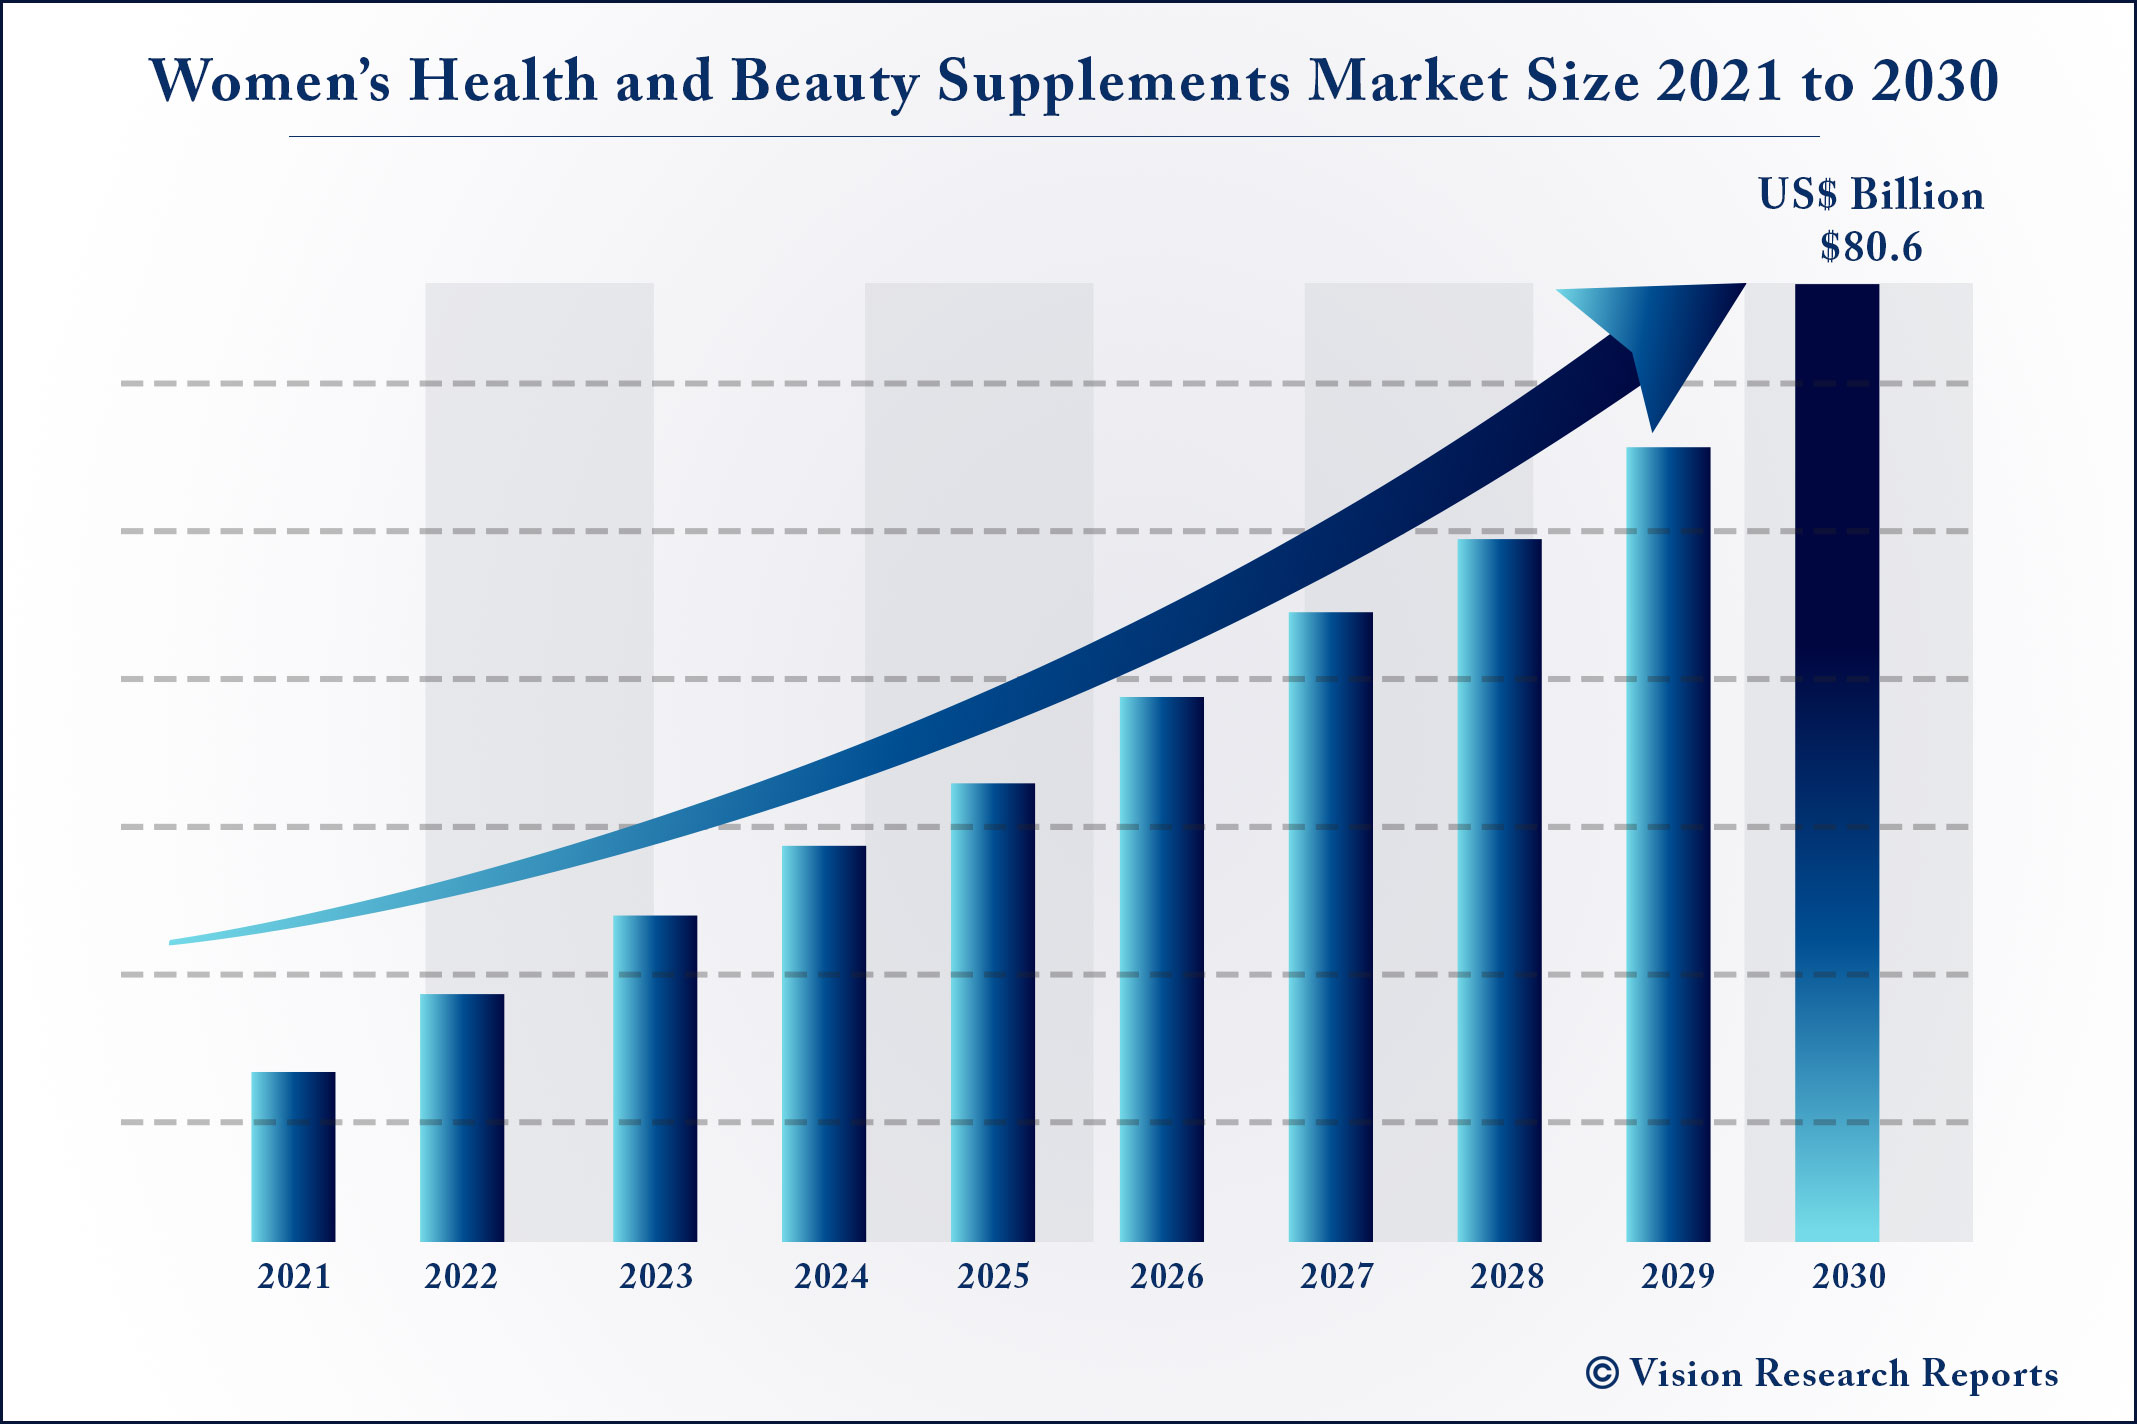 Women’s Health and Beauty Supplements Market Size 2021 to 2030